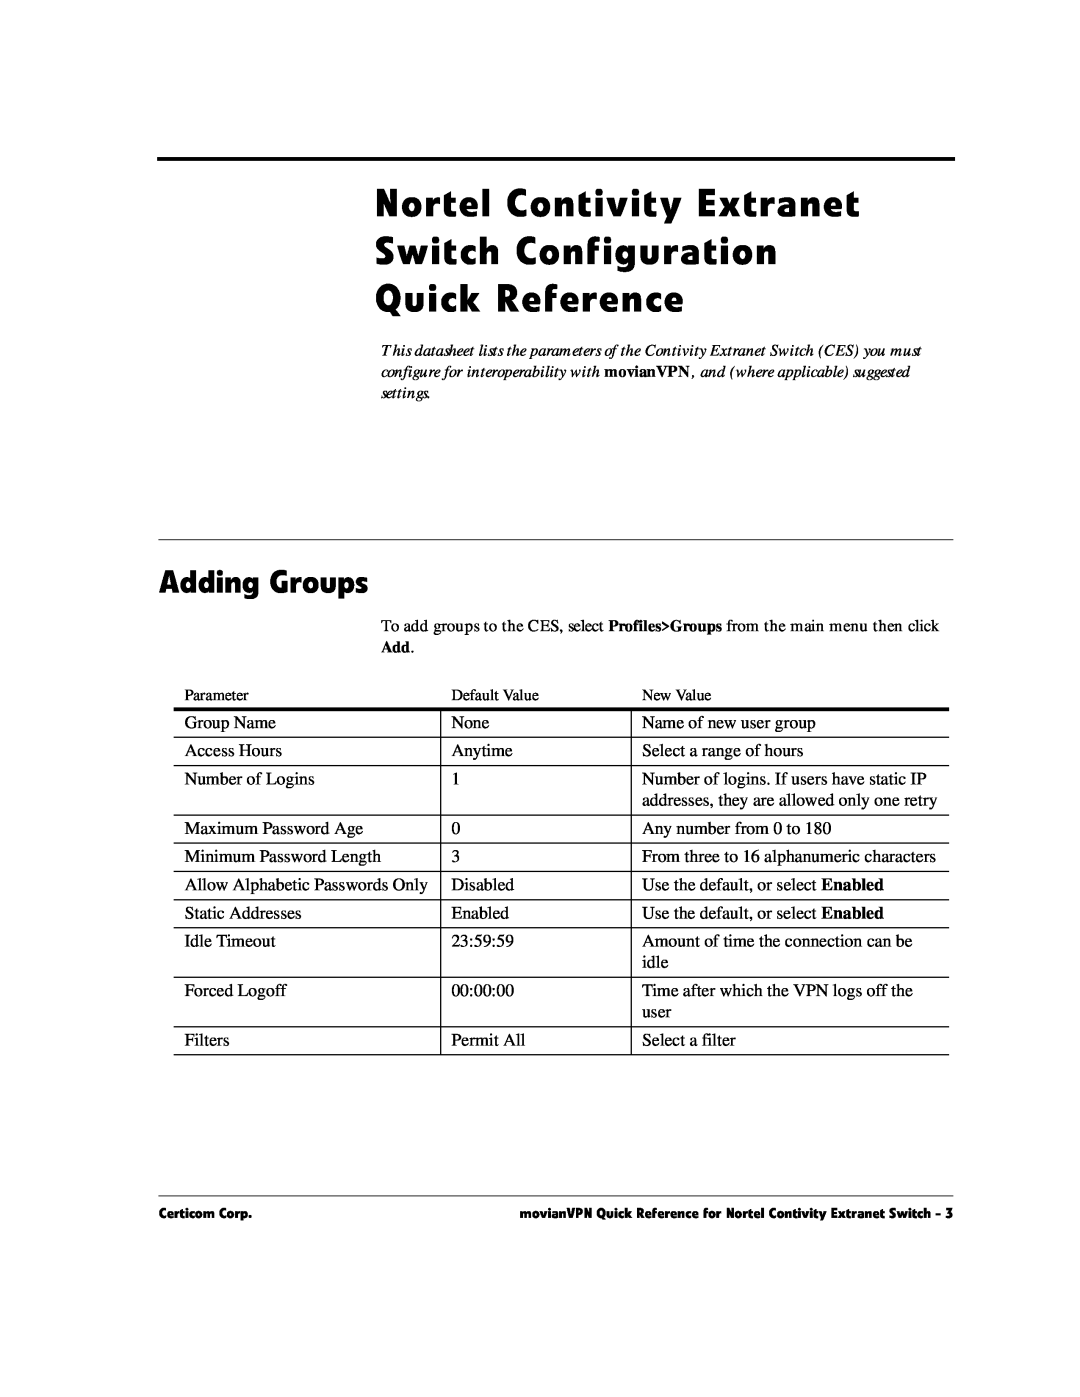 Nortel Networks movianVPN manual Adding Groups, Nortel Contivity Extranet Switch Configuration Quick Reference 